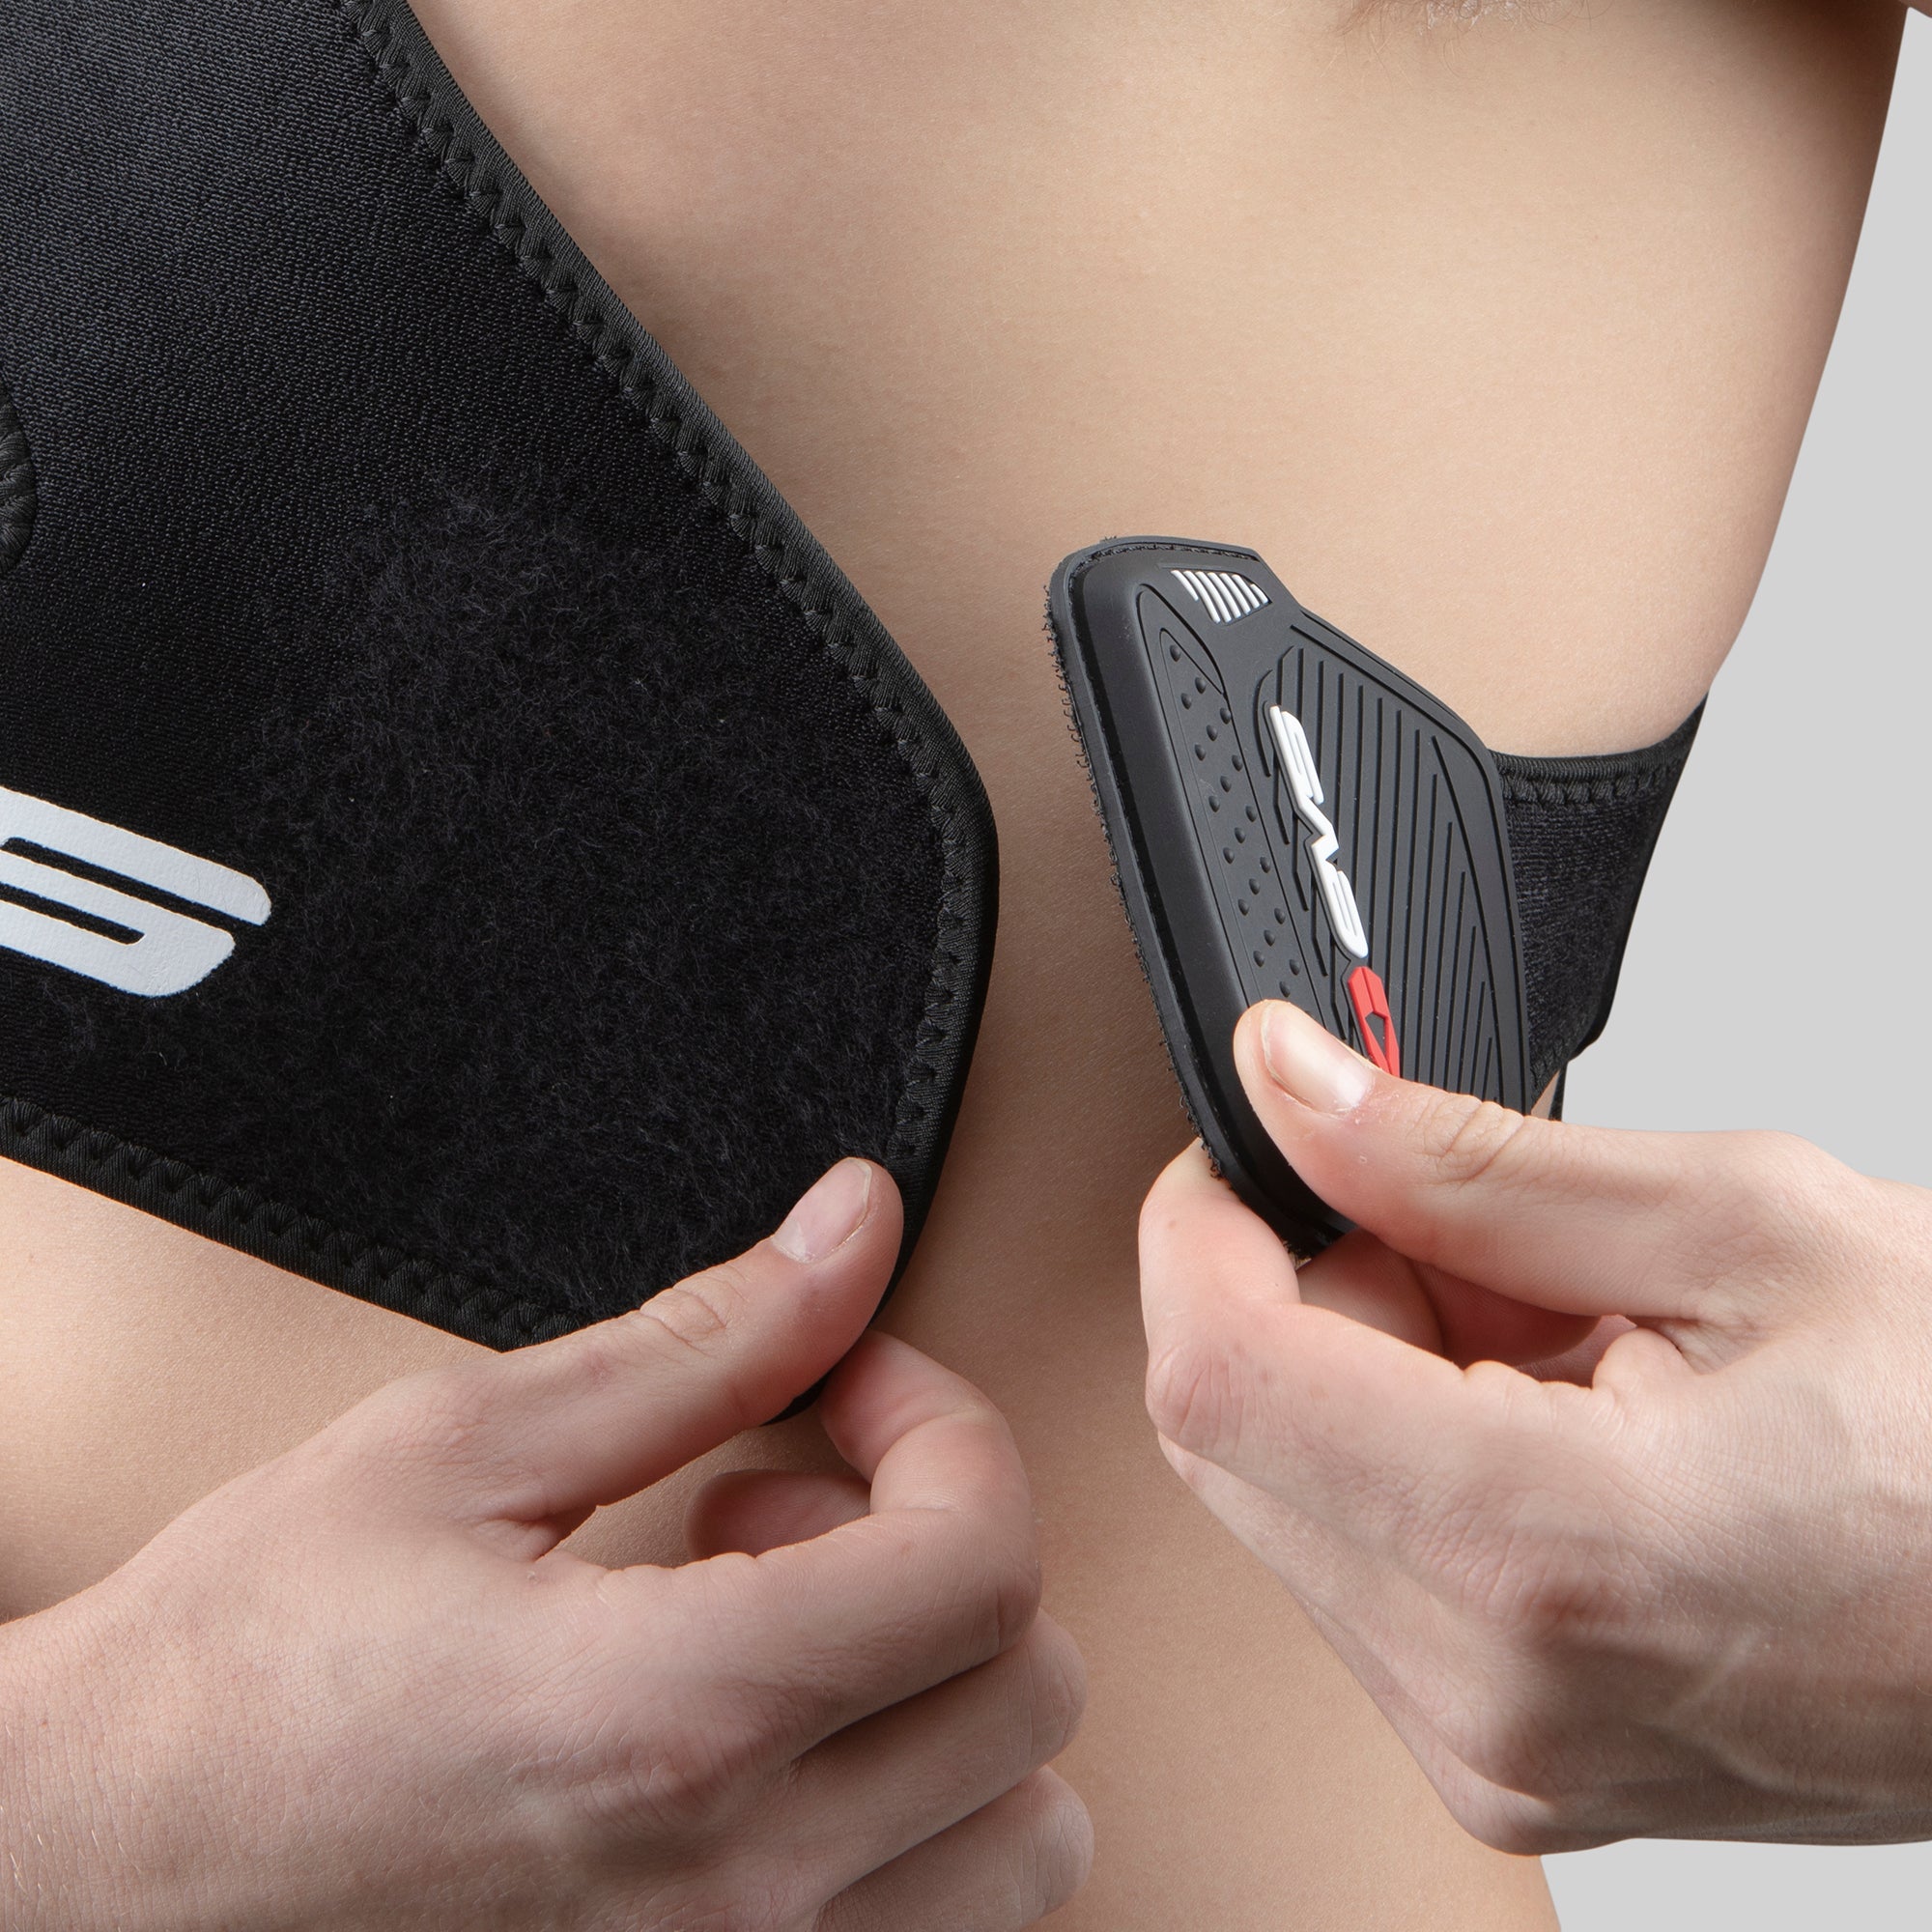 Brace for Impact: Shoulder Injury Support and Protection from EVS